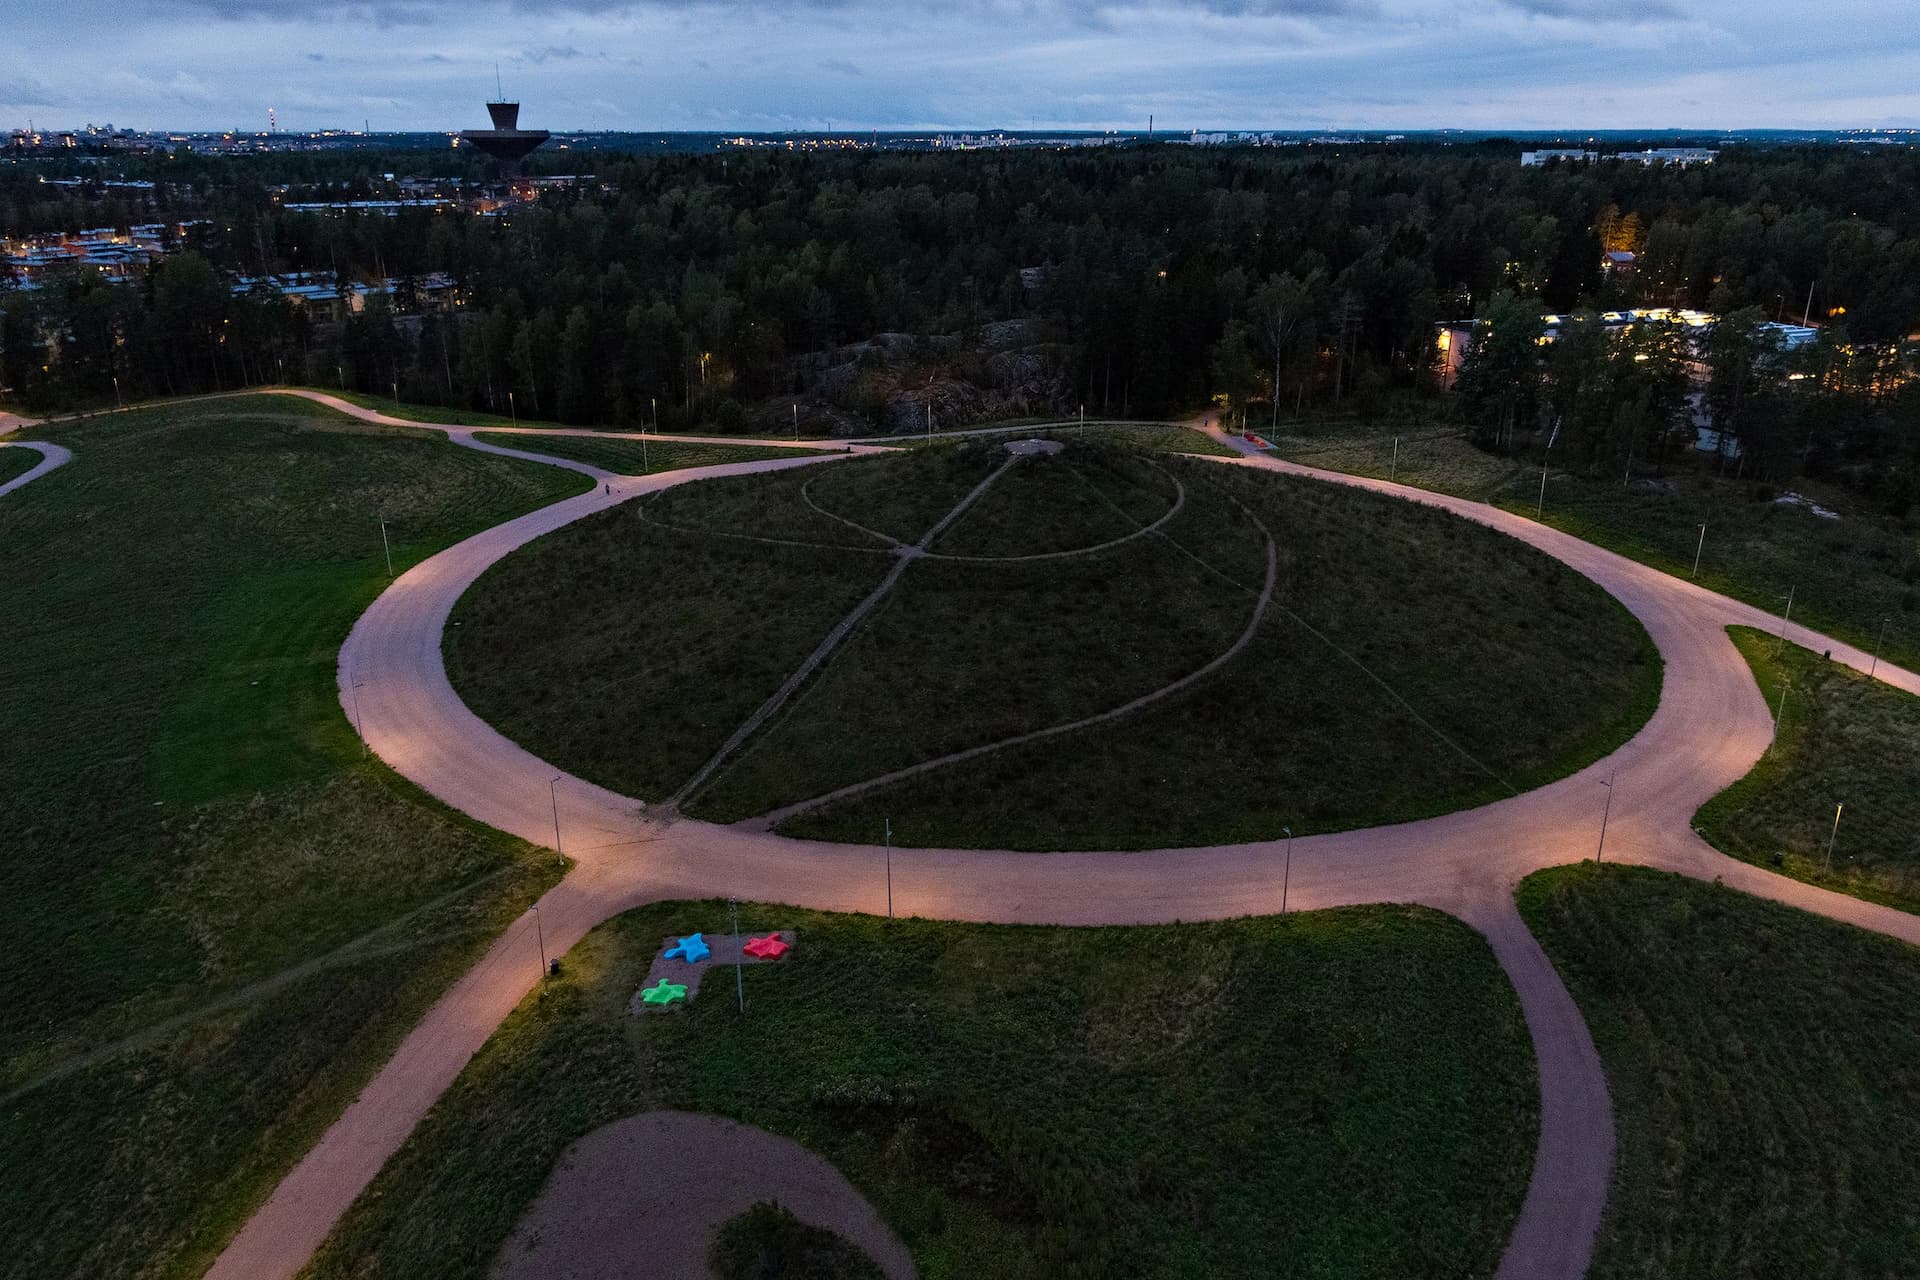 Aerial photo of Alakivenpuisto park in Helsinki, Finland.